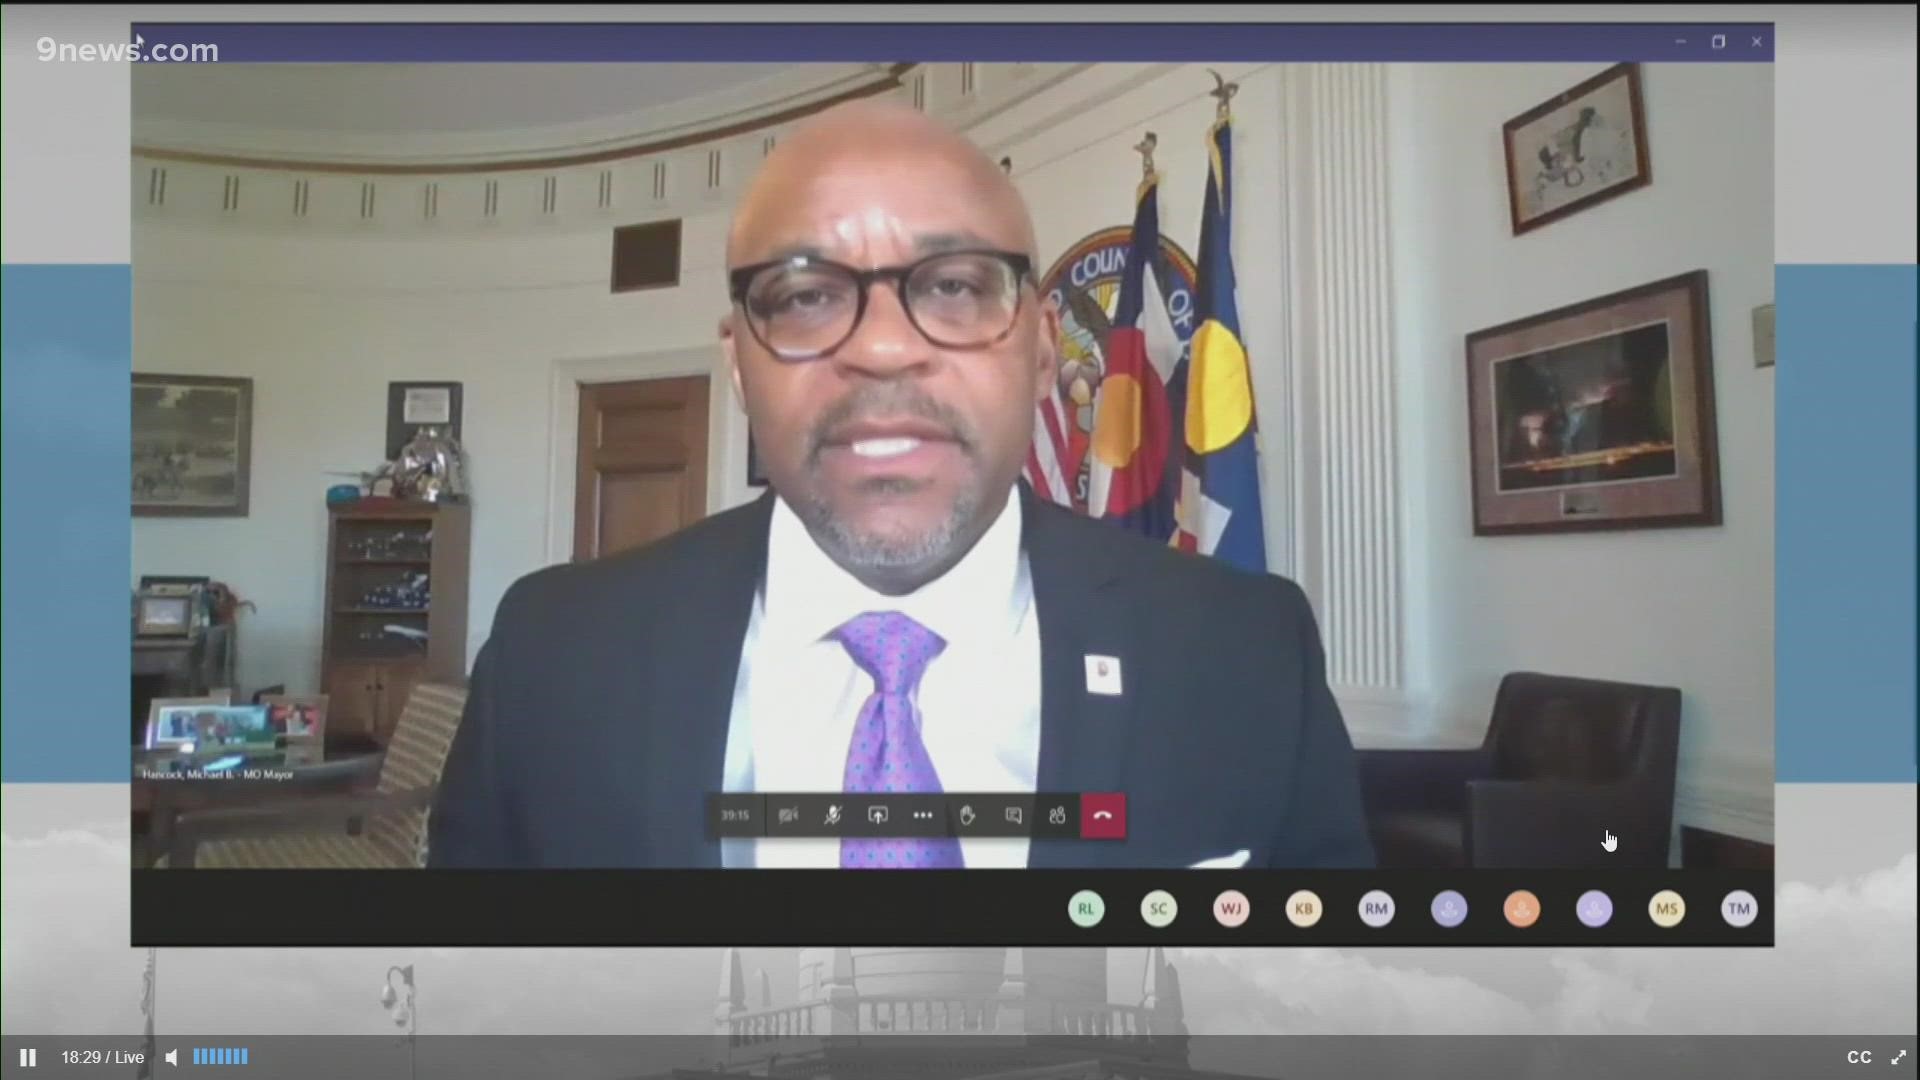 Mayor Hancock provided an update virtually from the City and County Building where he discussed a rise in coronavirus case rates in Denver.